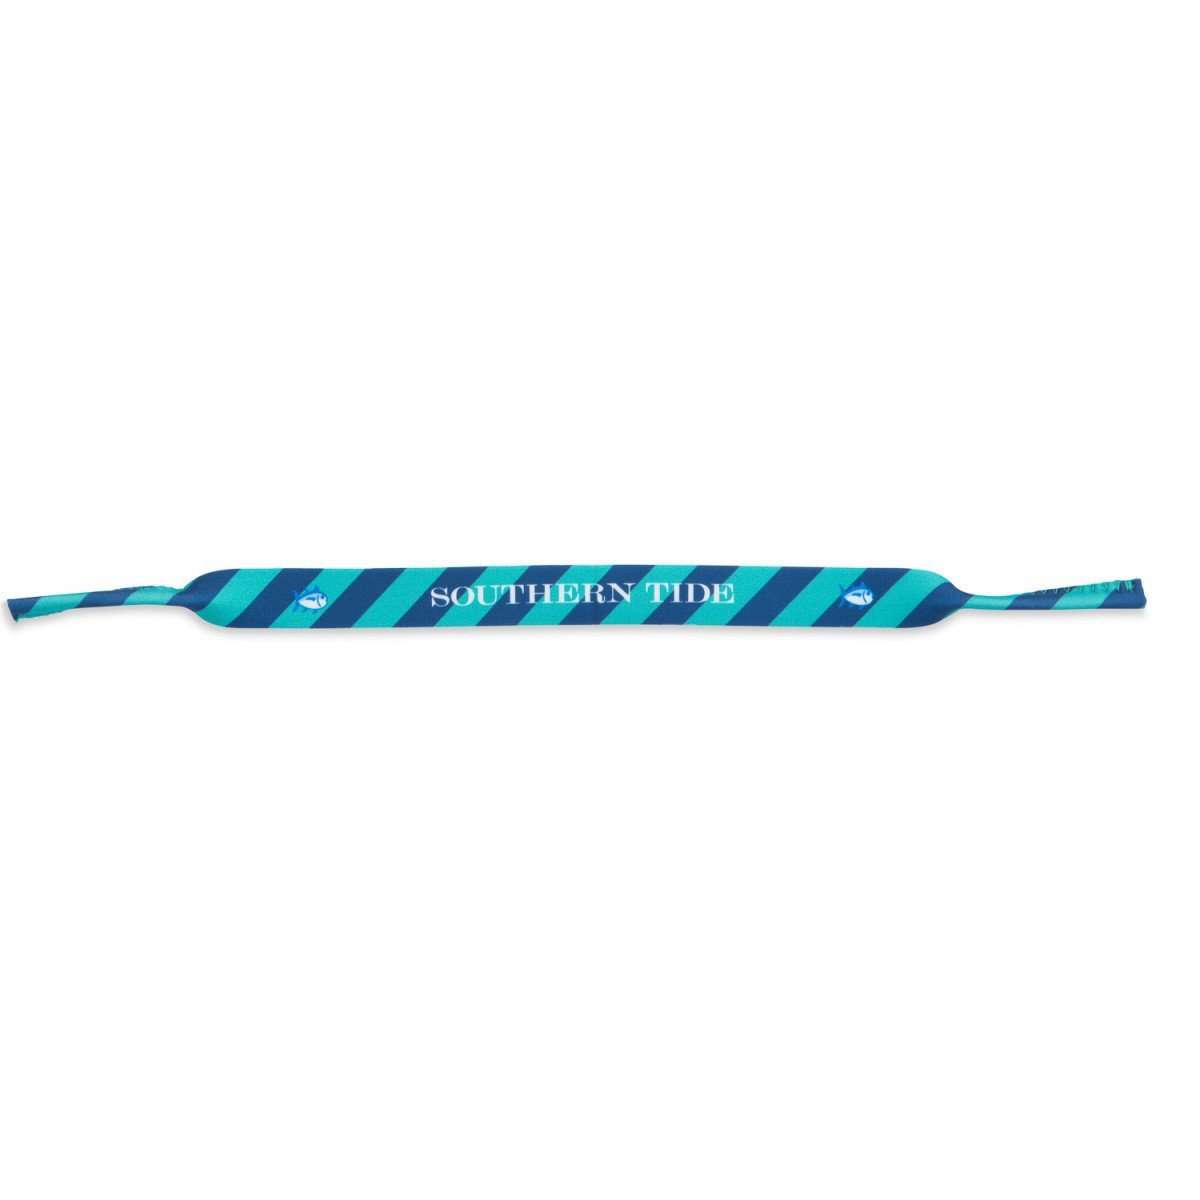 Stripe Sunglass Straps in Teal and Navy by Southern Tide - Country Club Prep